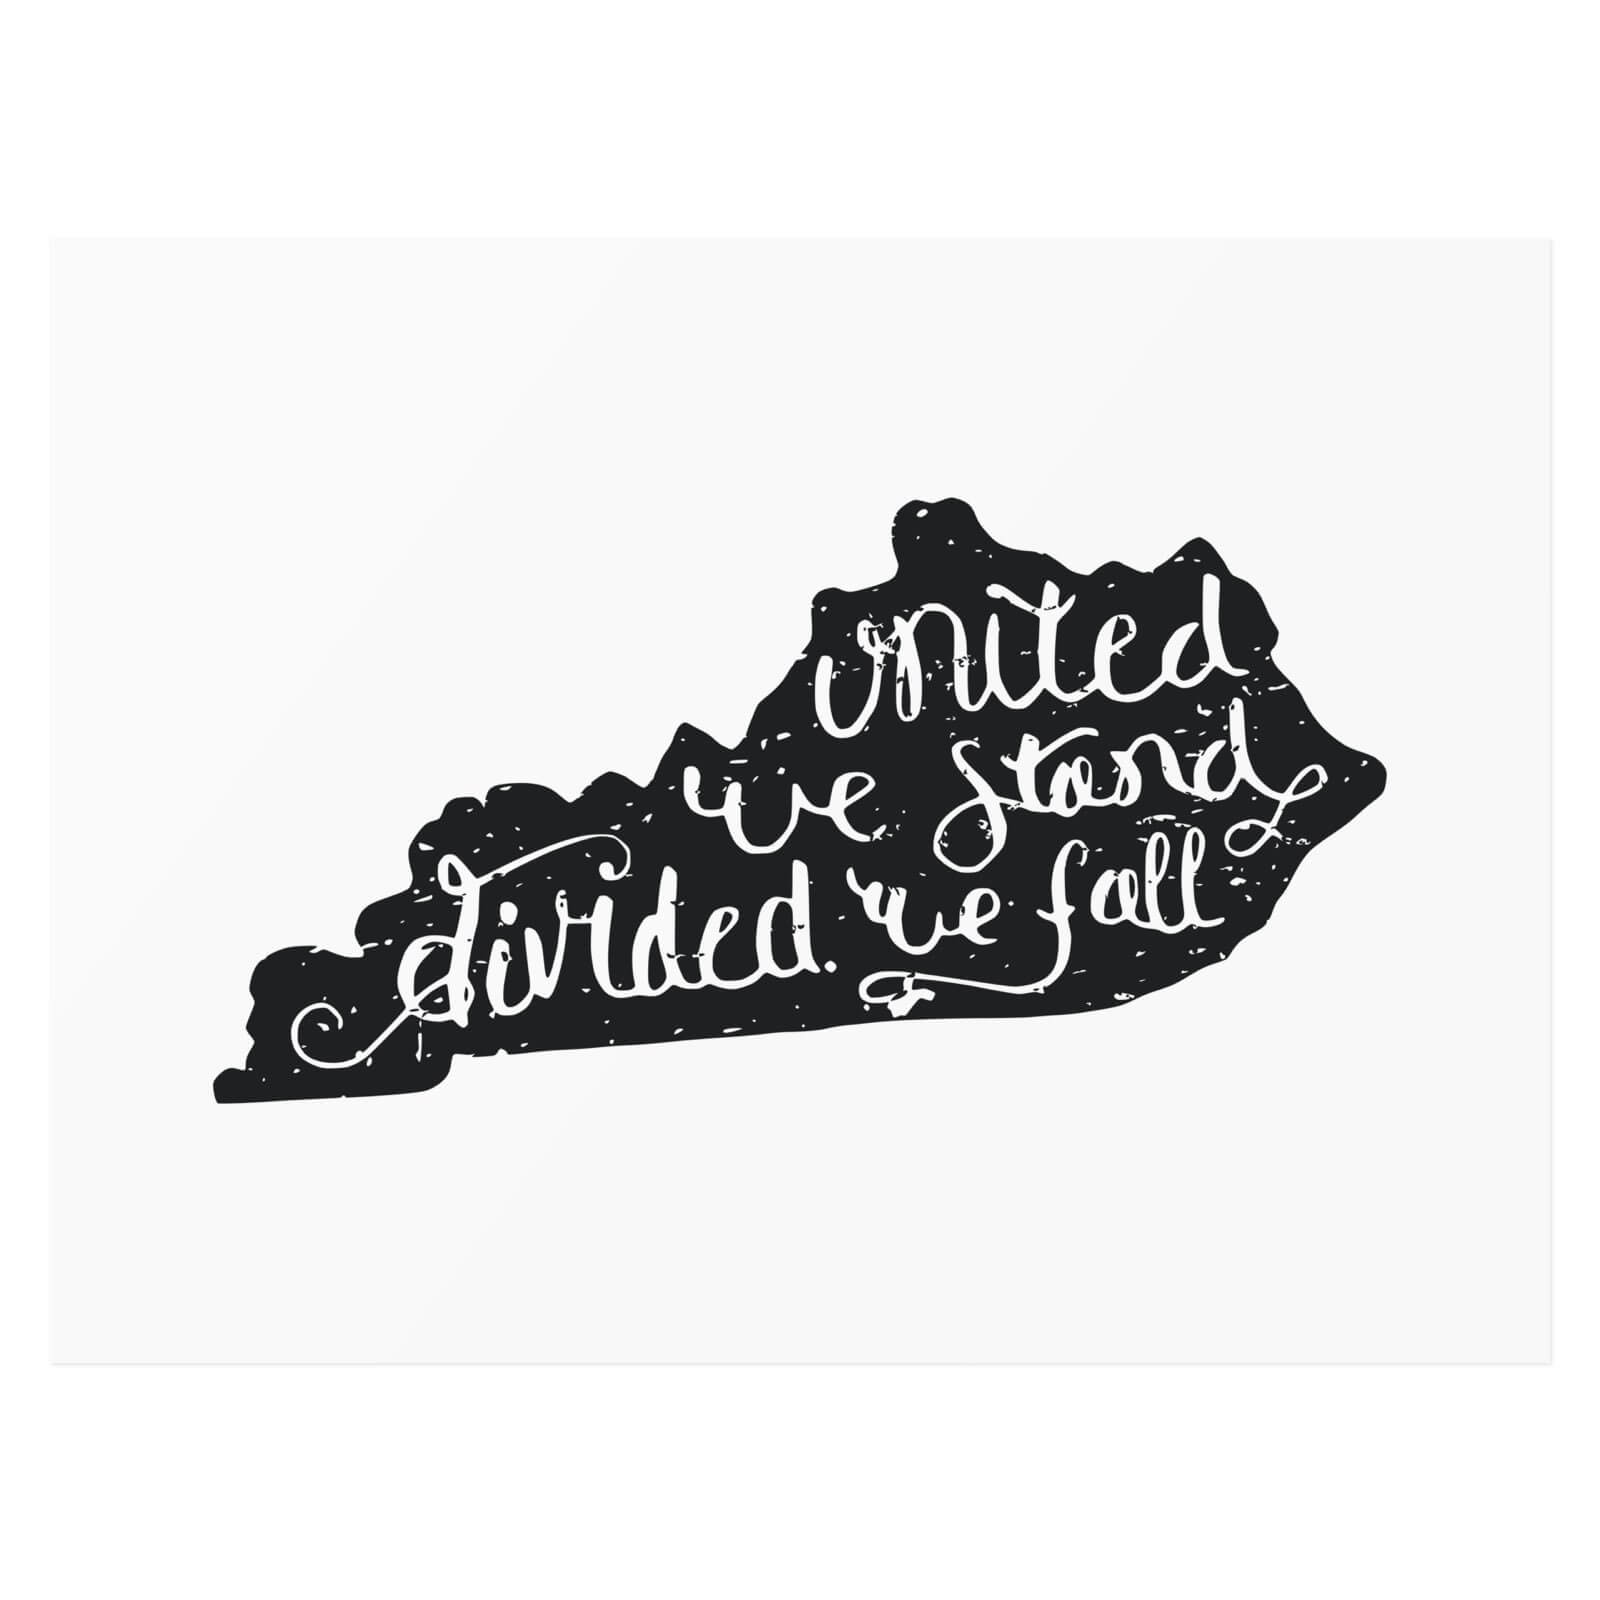 Kentucky — United we stand, divided we fall